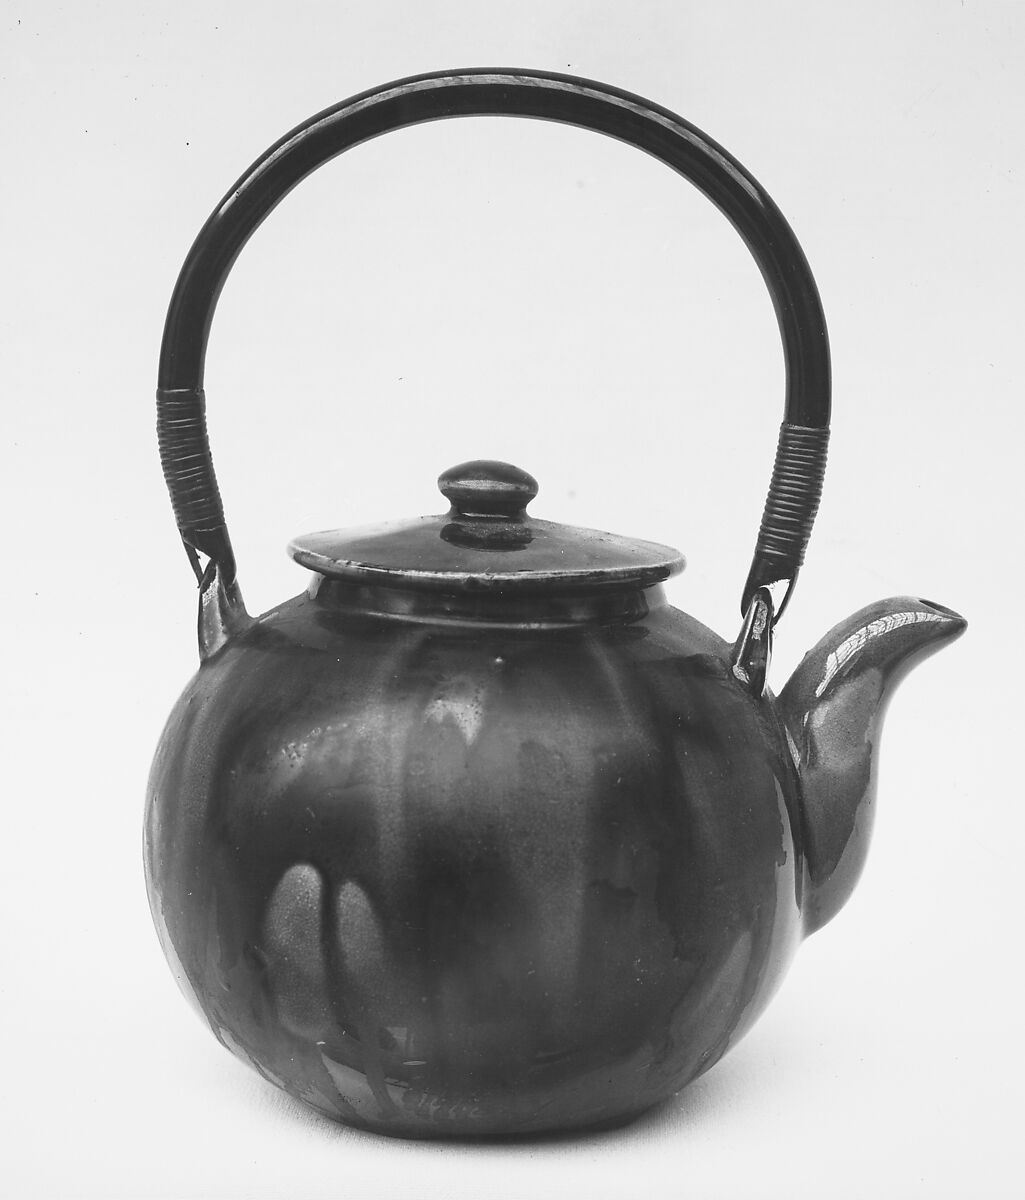 Teapot, Clay covered with glaze, black and yellow with green touches (Satsuma Bekko de), Japan 